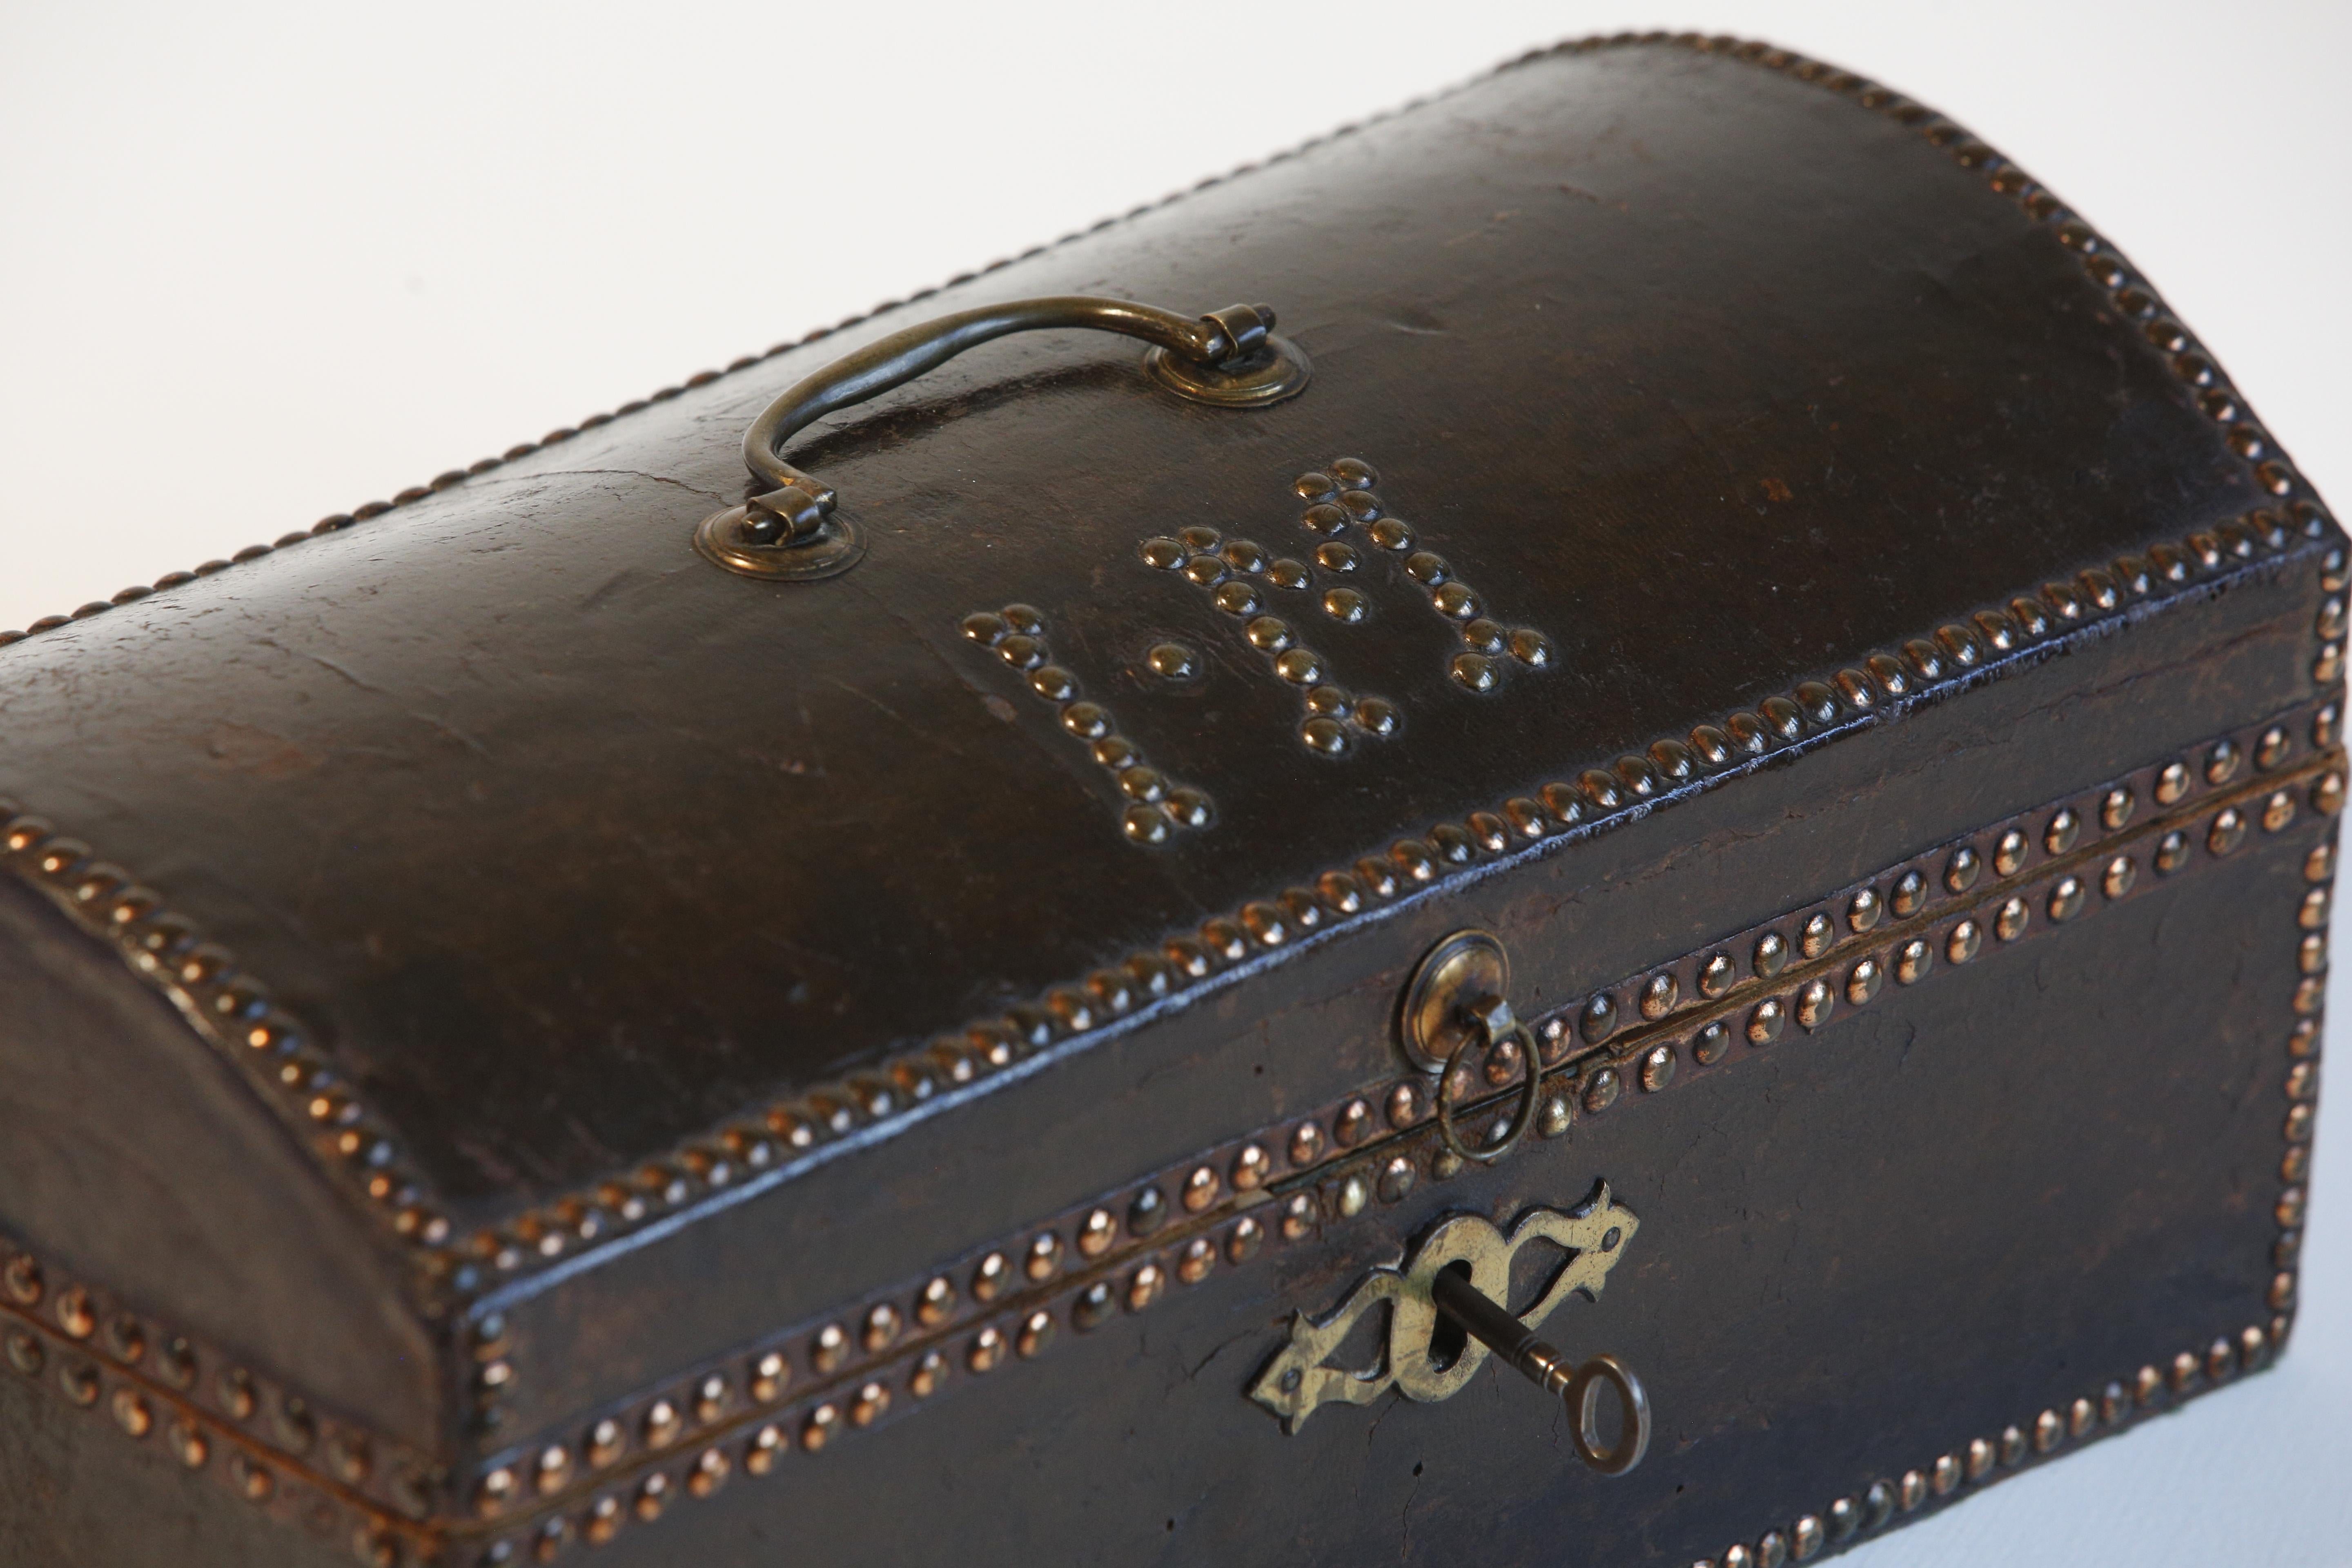 Regency leather studded traveling case by Chapple & Sons of Cheapside London with studded brass initials ( I * M )

This compact Regency trunk is constructed from black leather on a pine carcass and is adorned with numerous brass dome-topped studs.